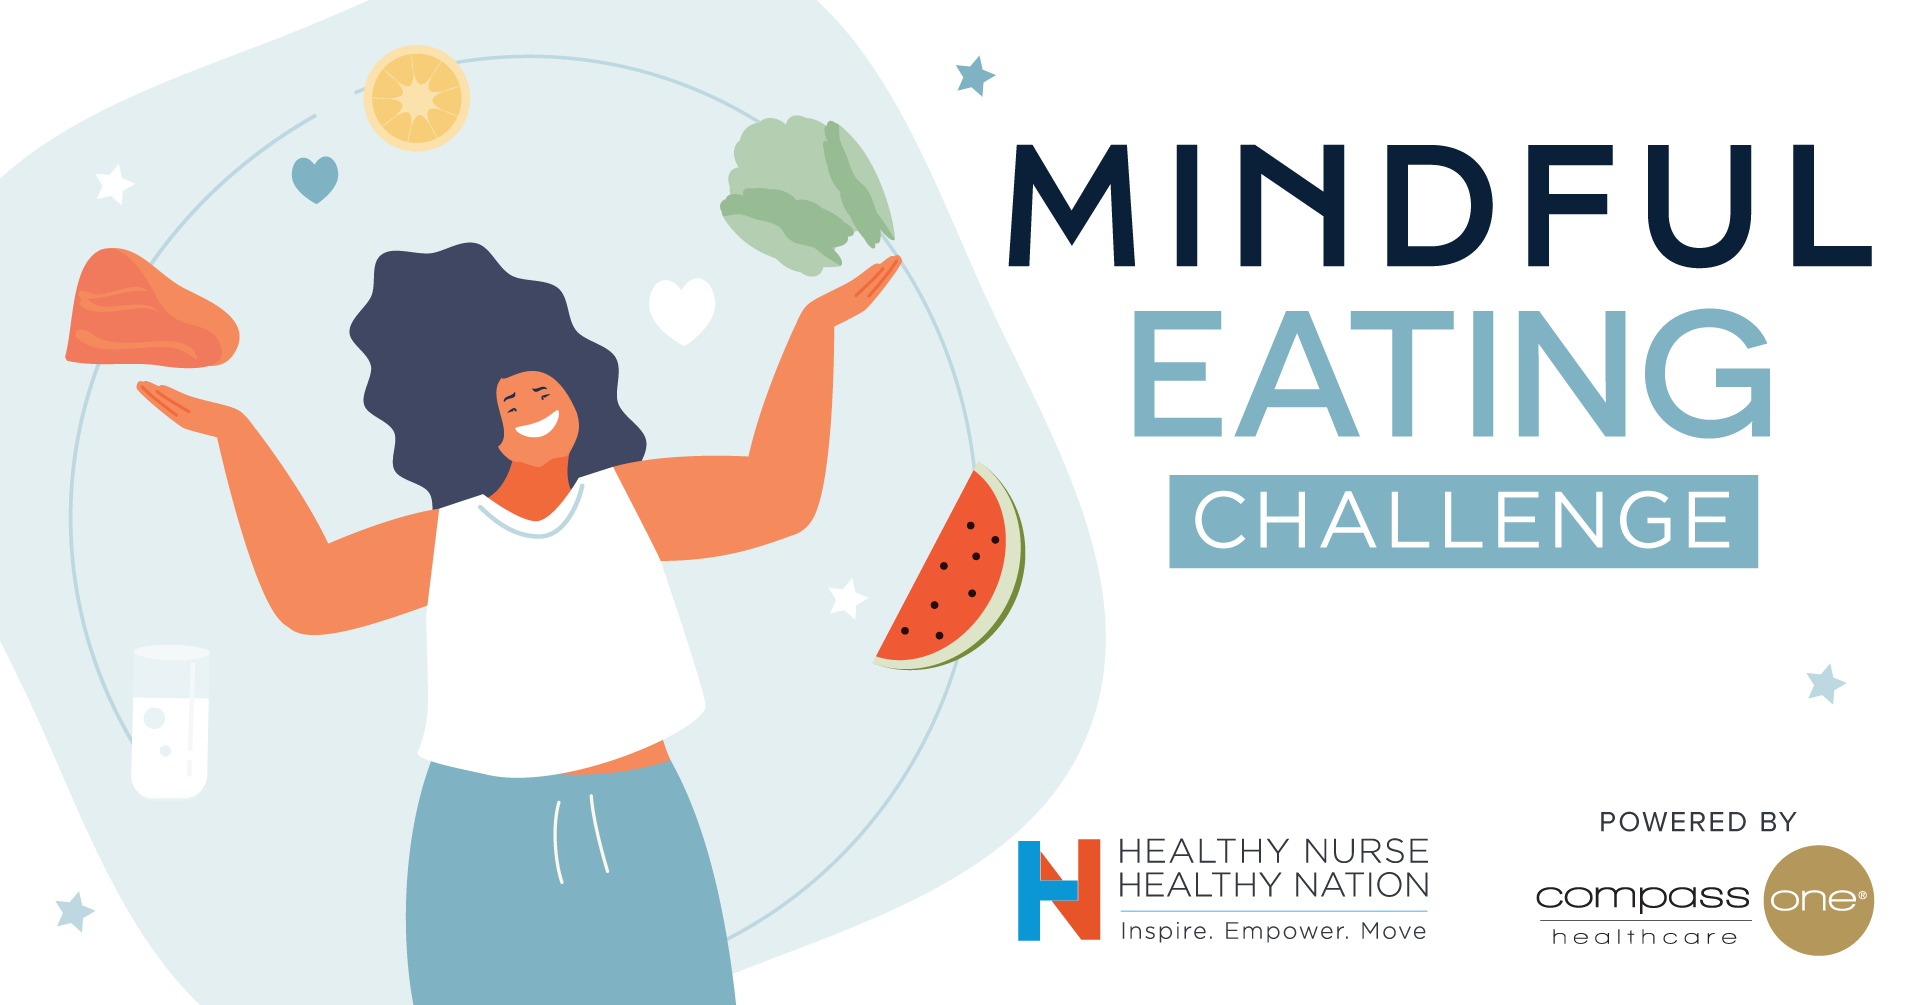 Mastering Mindful Moderation - Mindful Eating, powered by Morrison Healthcare, a Division of Compass One Healthcare - Day 5 Tip 4686